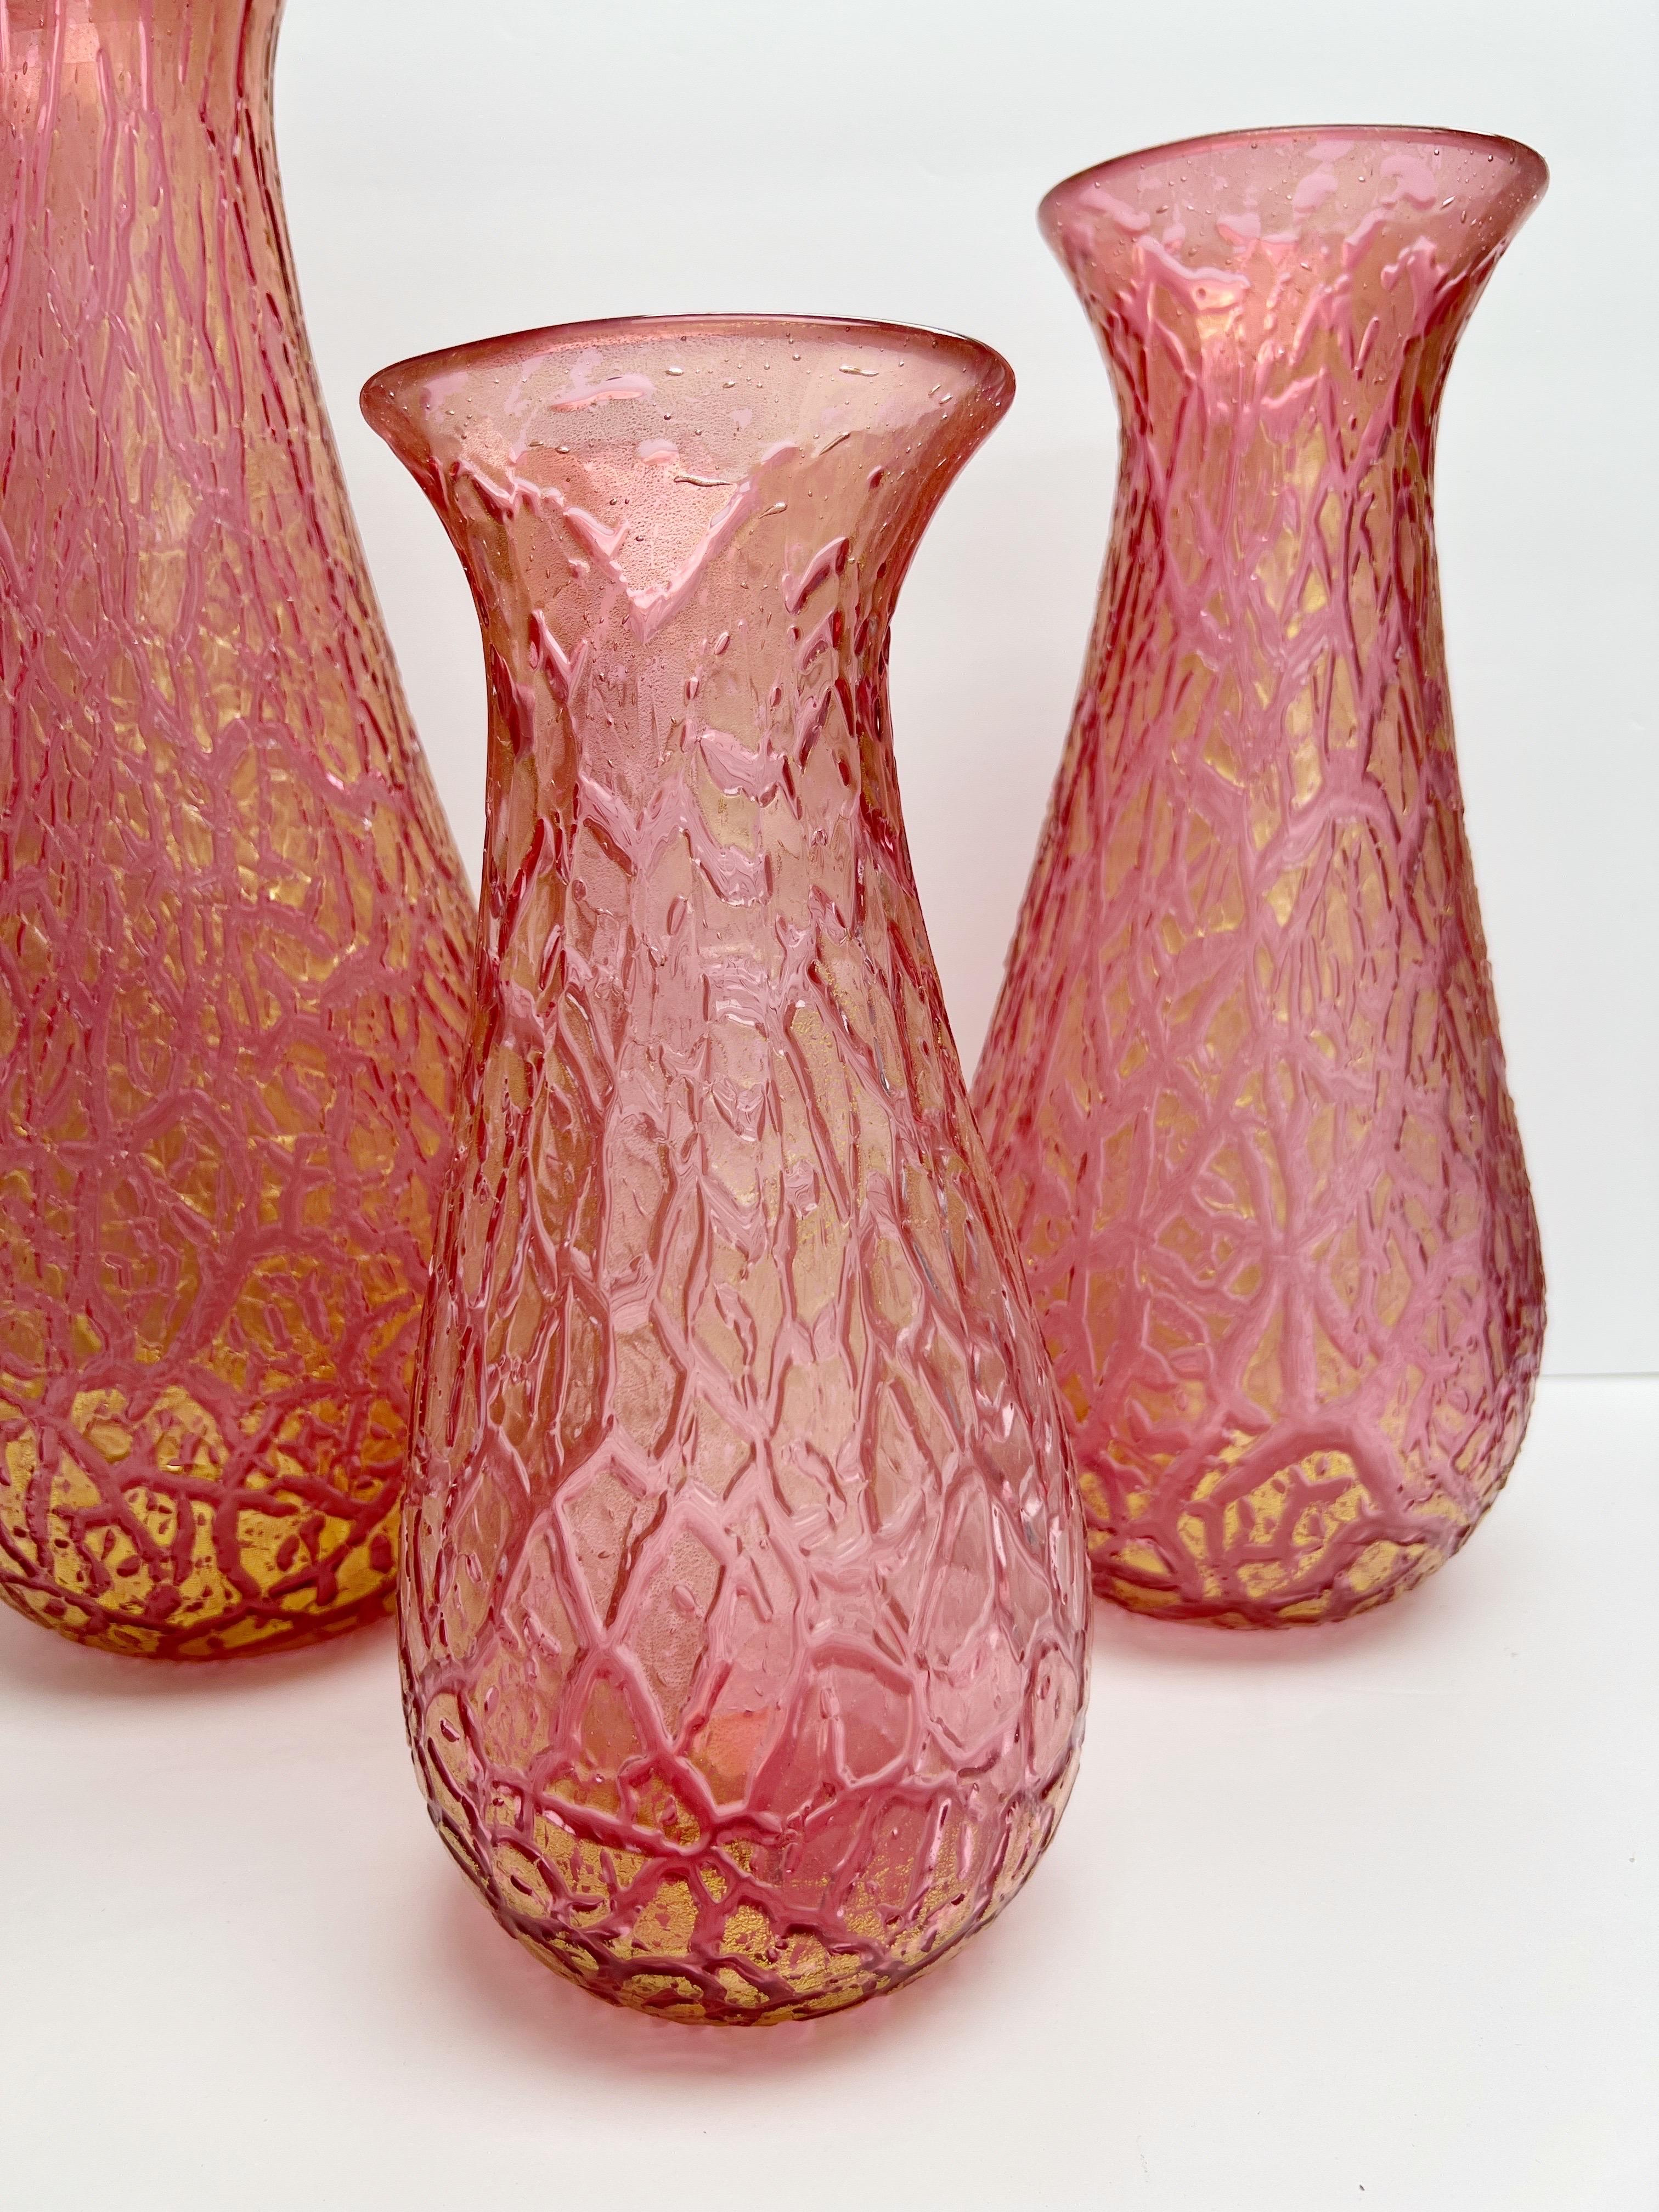 A set of 3 large vessels. the surface has a cracked effect with gold inclusions. 